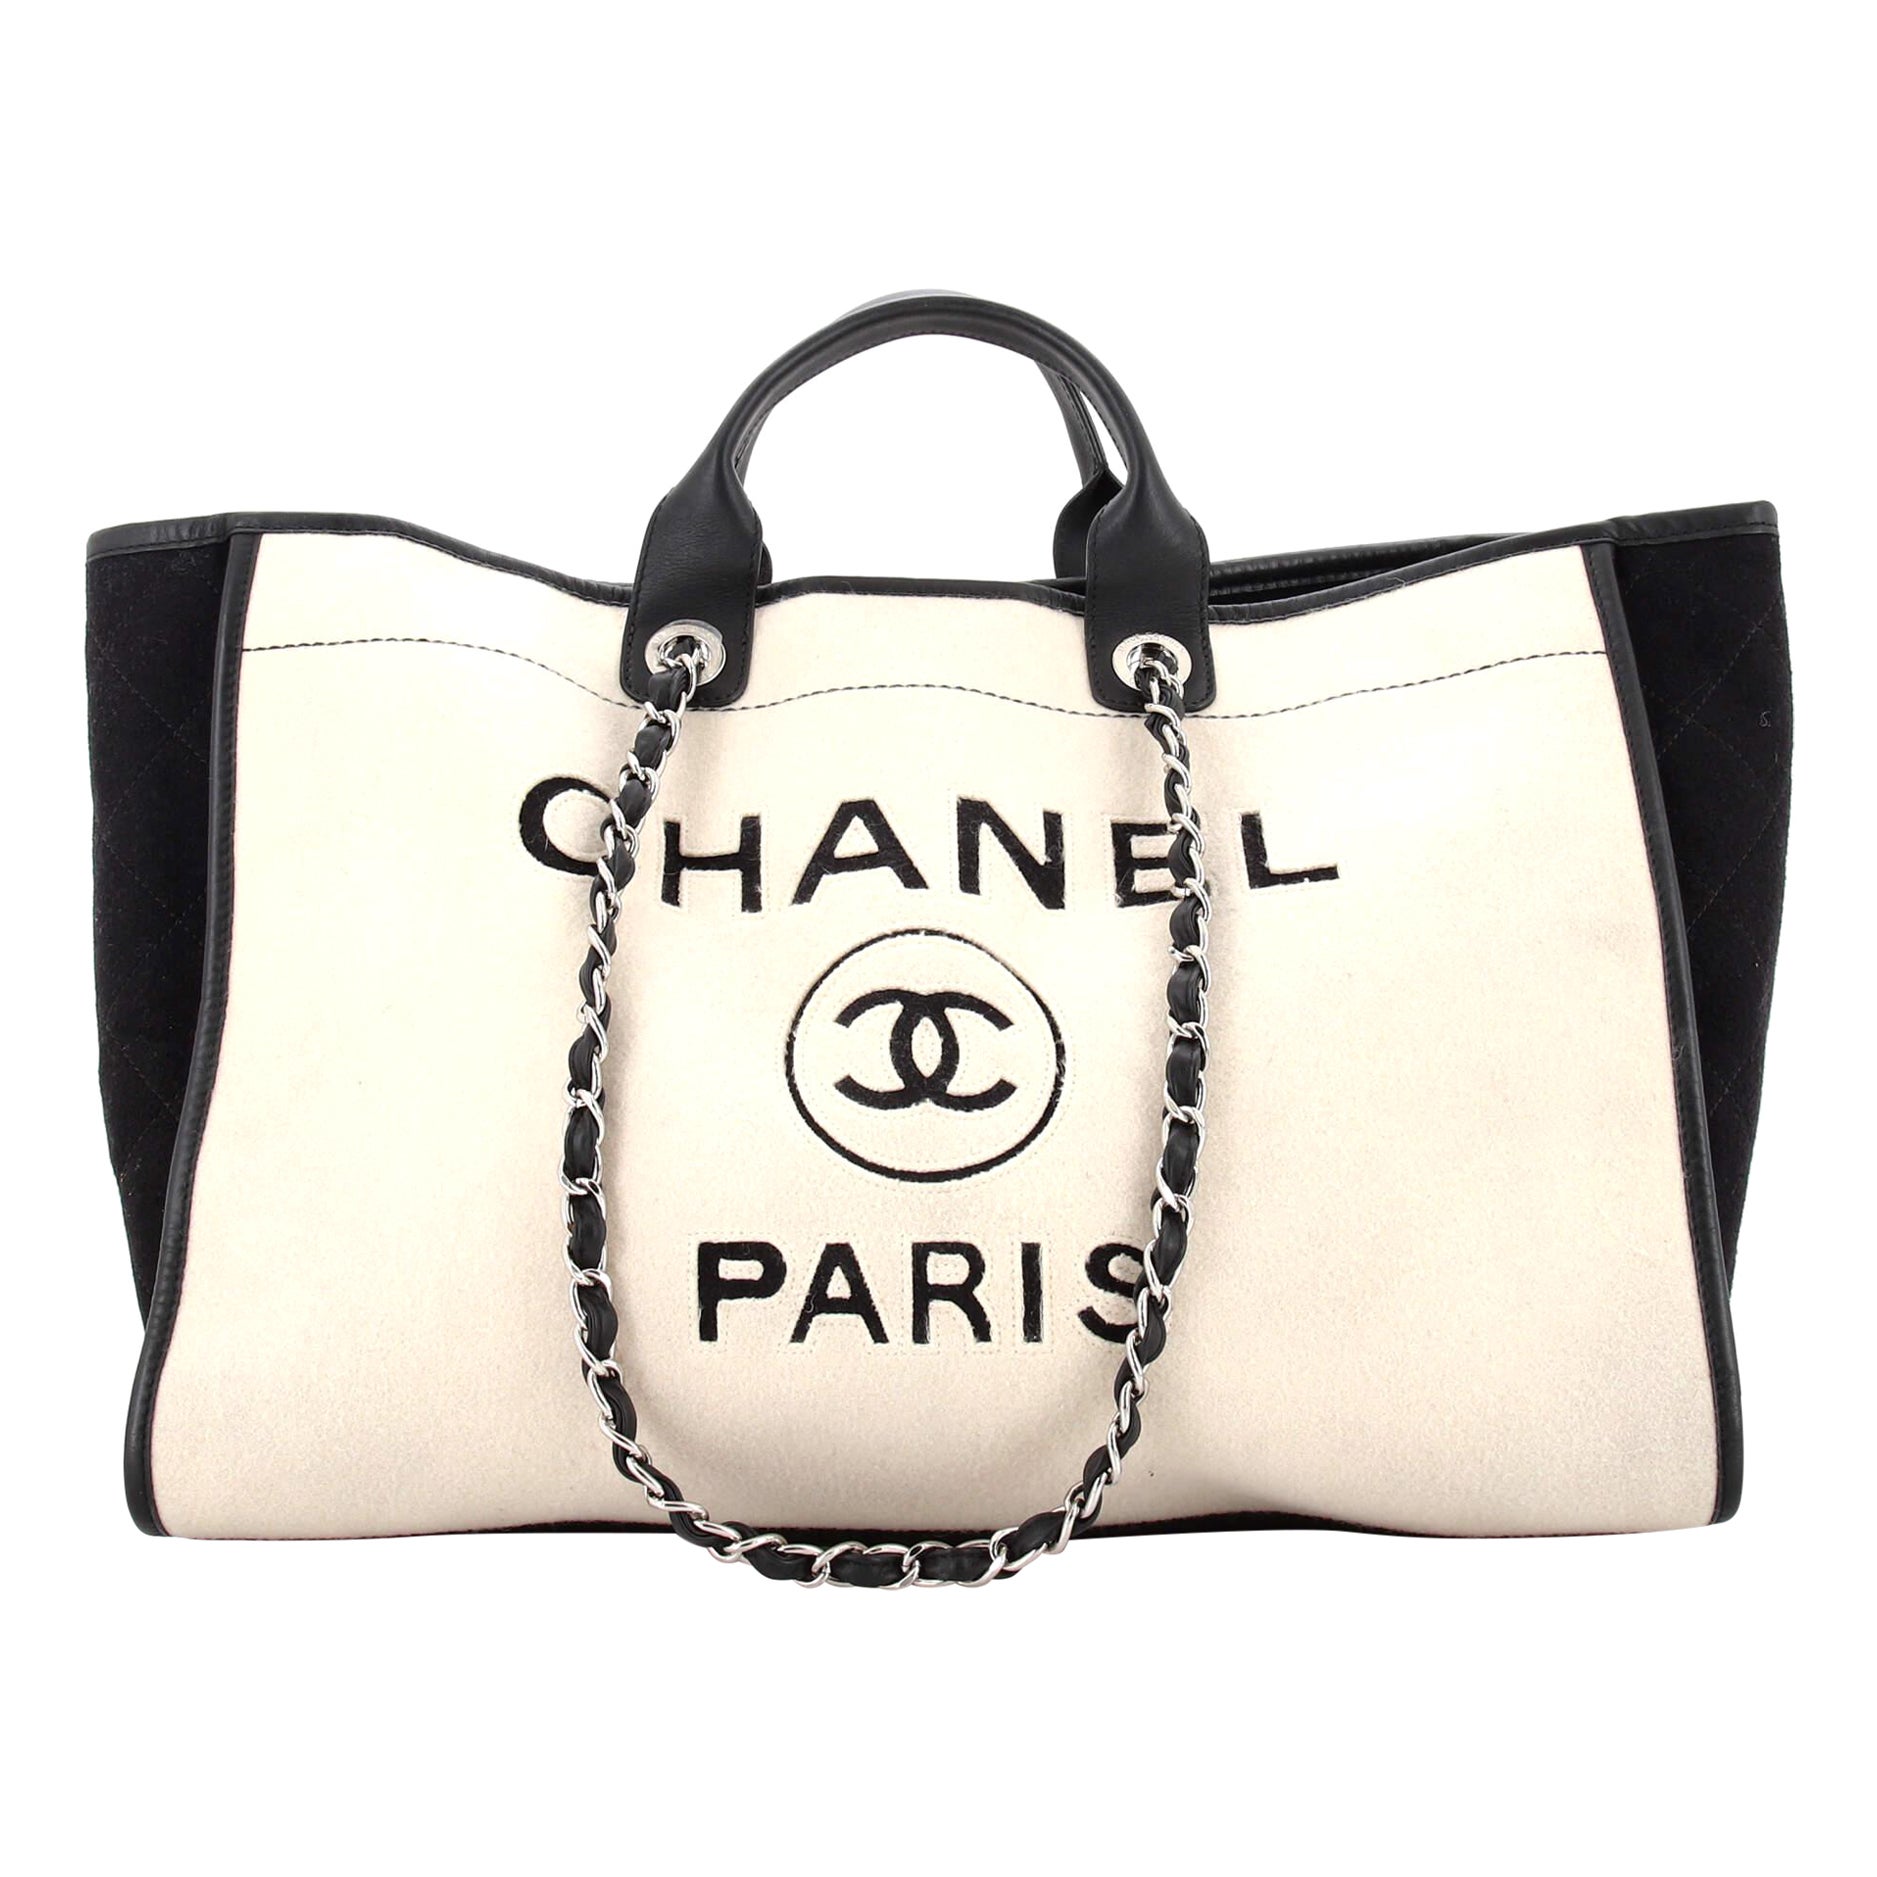 Chanel Deauville Tote Wool Felt Large